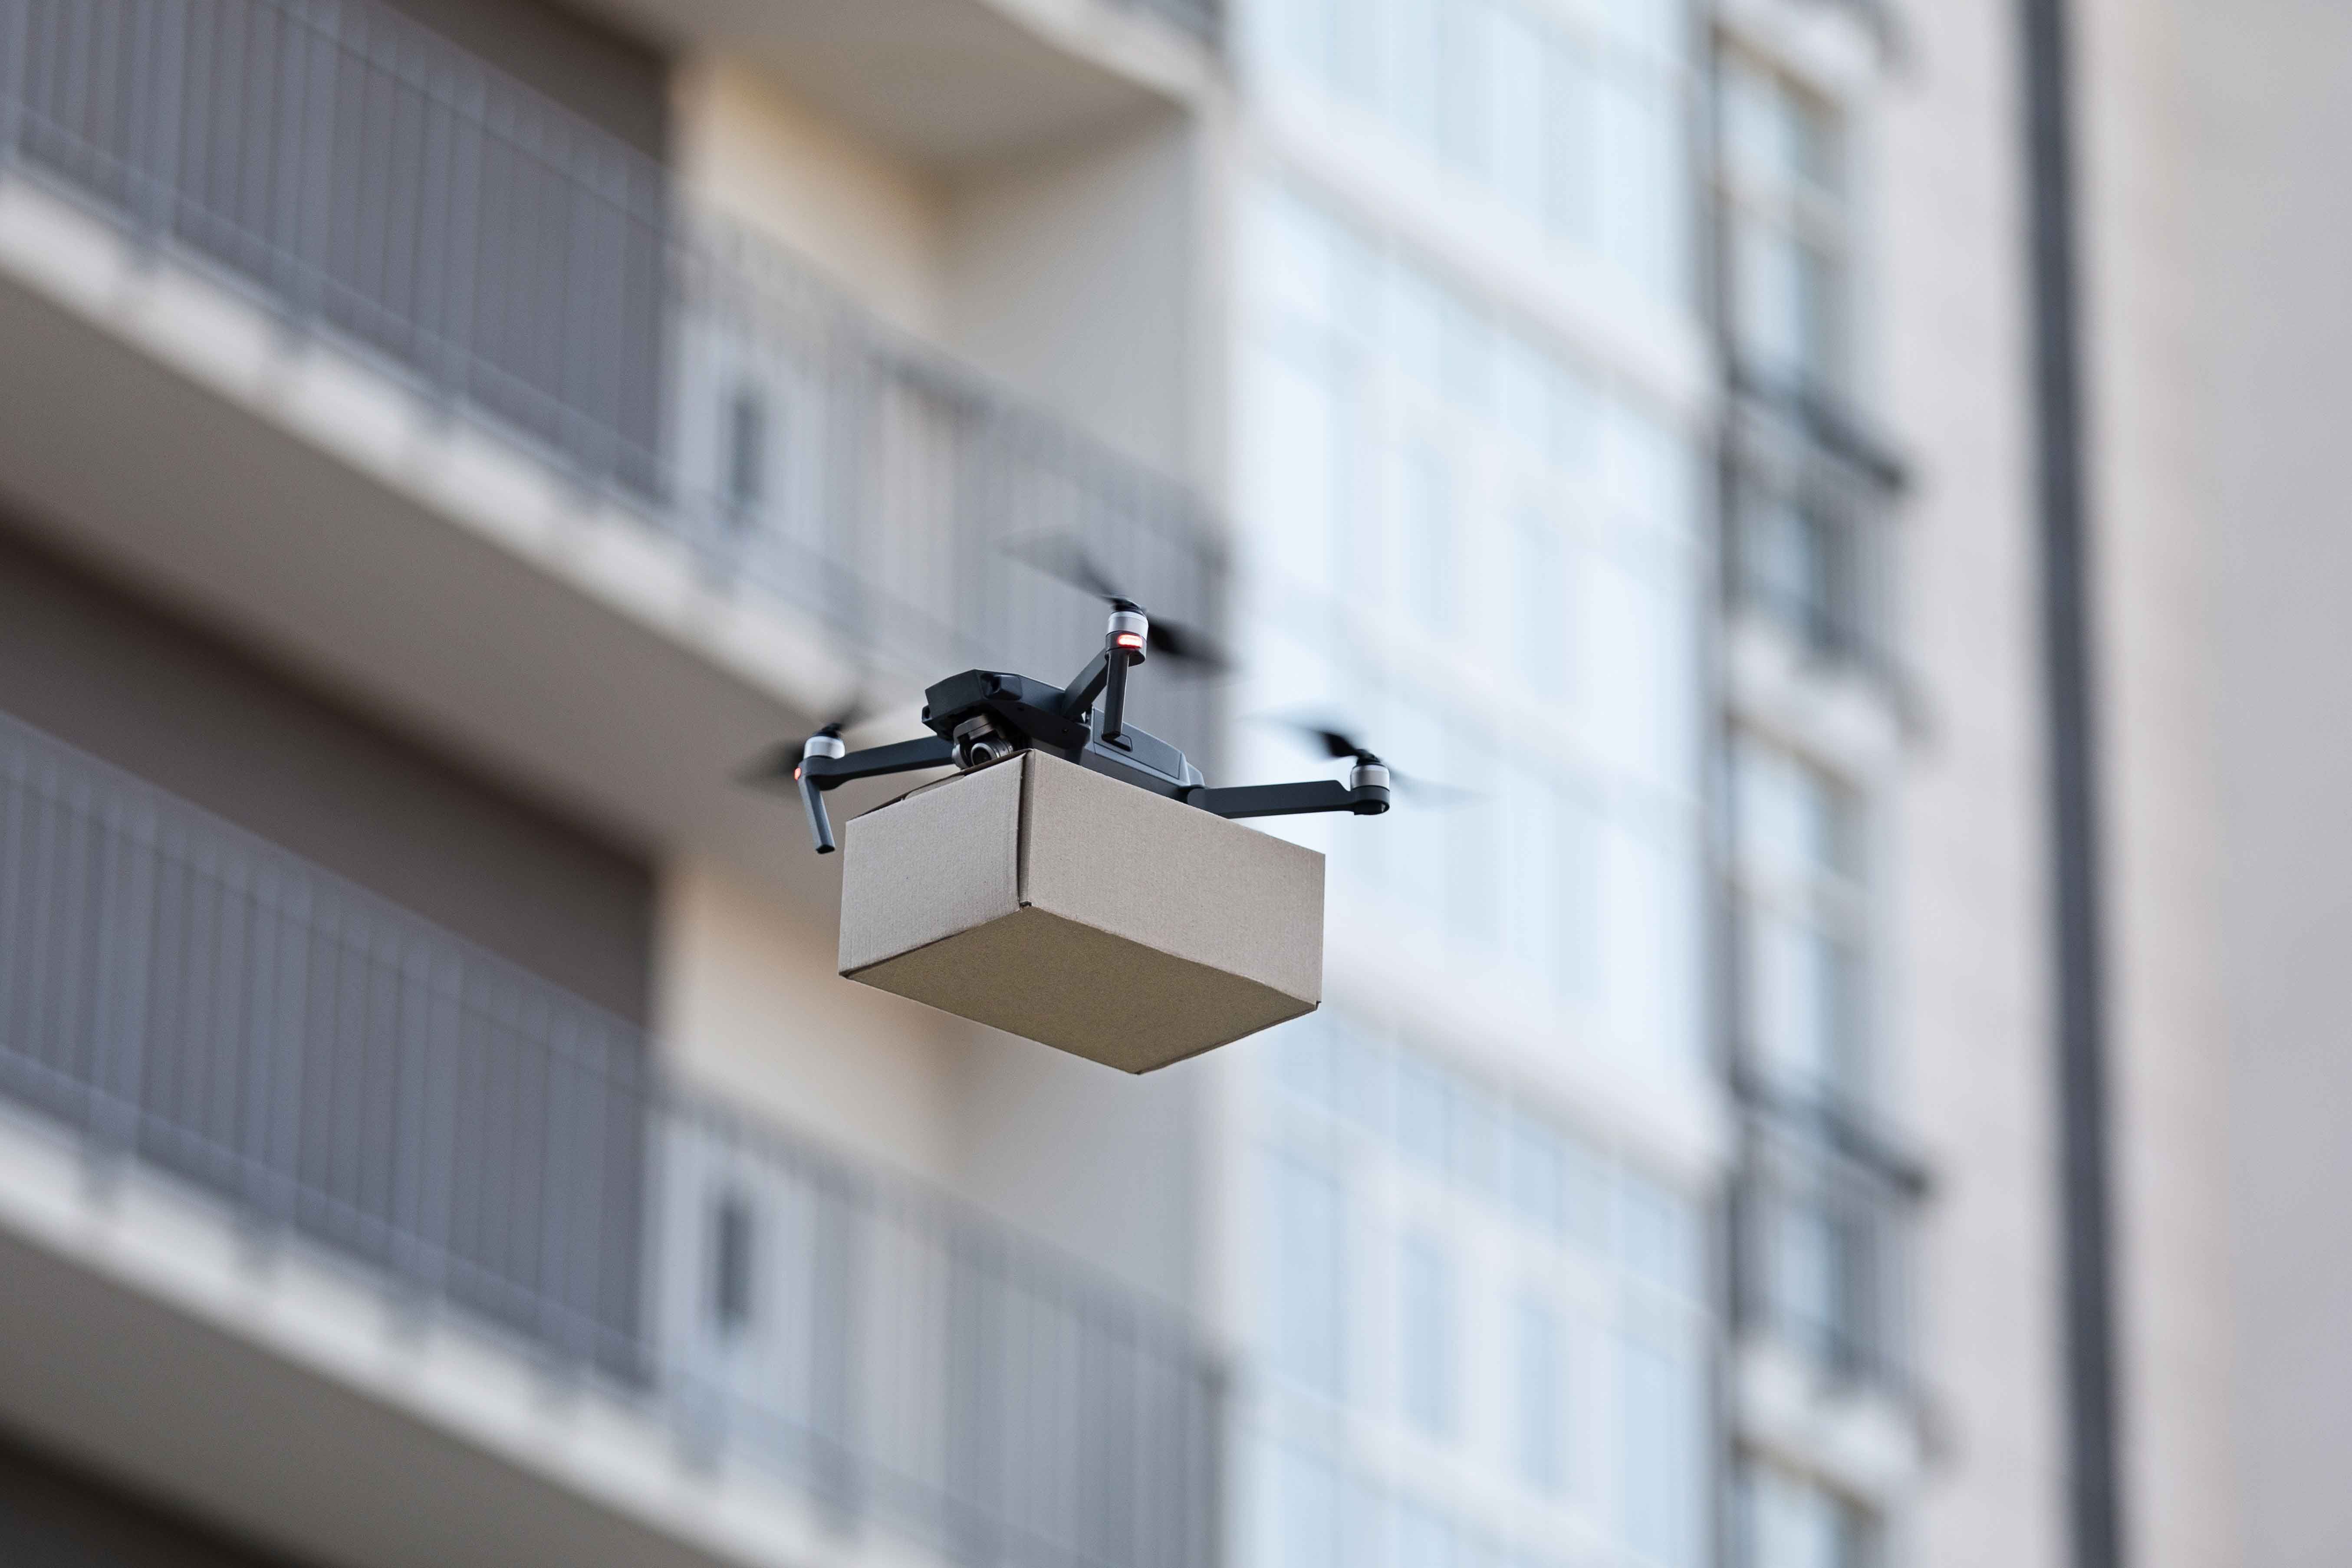 New FAA rules put drone delivery closer to reality